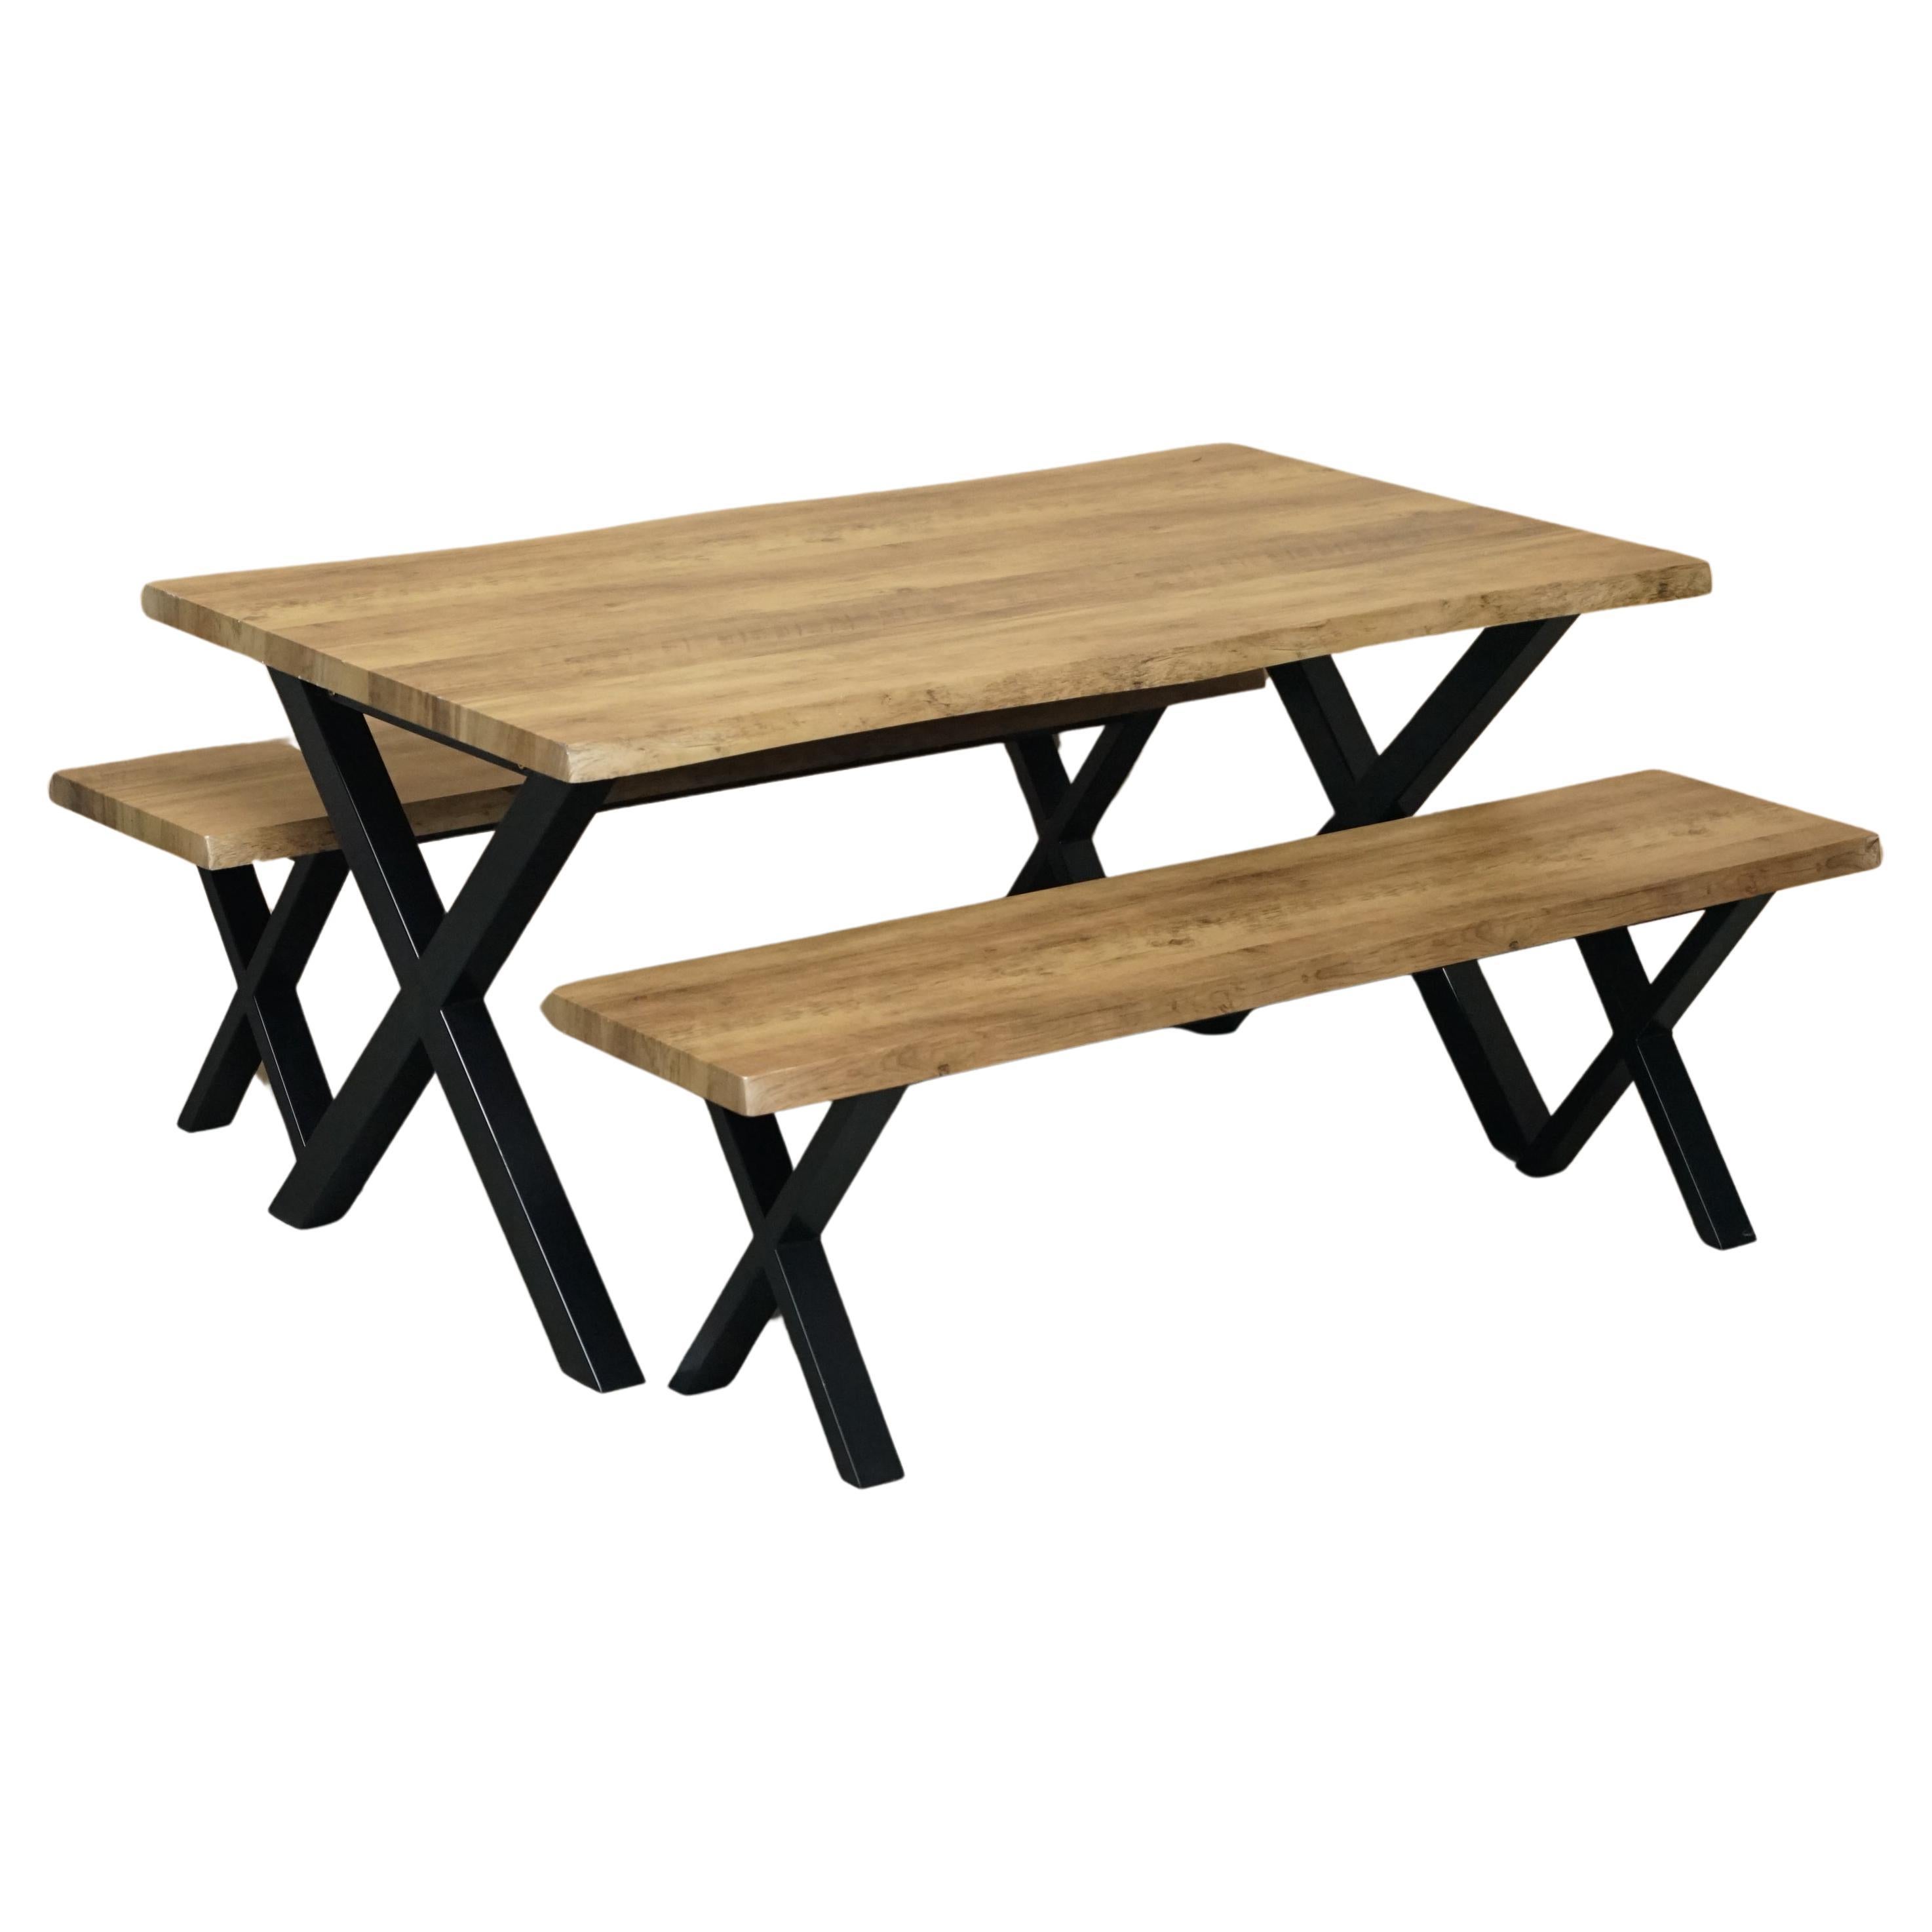 DECORATIVE CONTEMPORARY X FRAMED DINING TABLE & BENCHES PART OF A DiNING SUITE For Sale